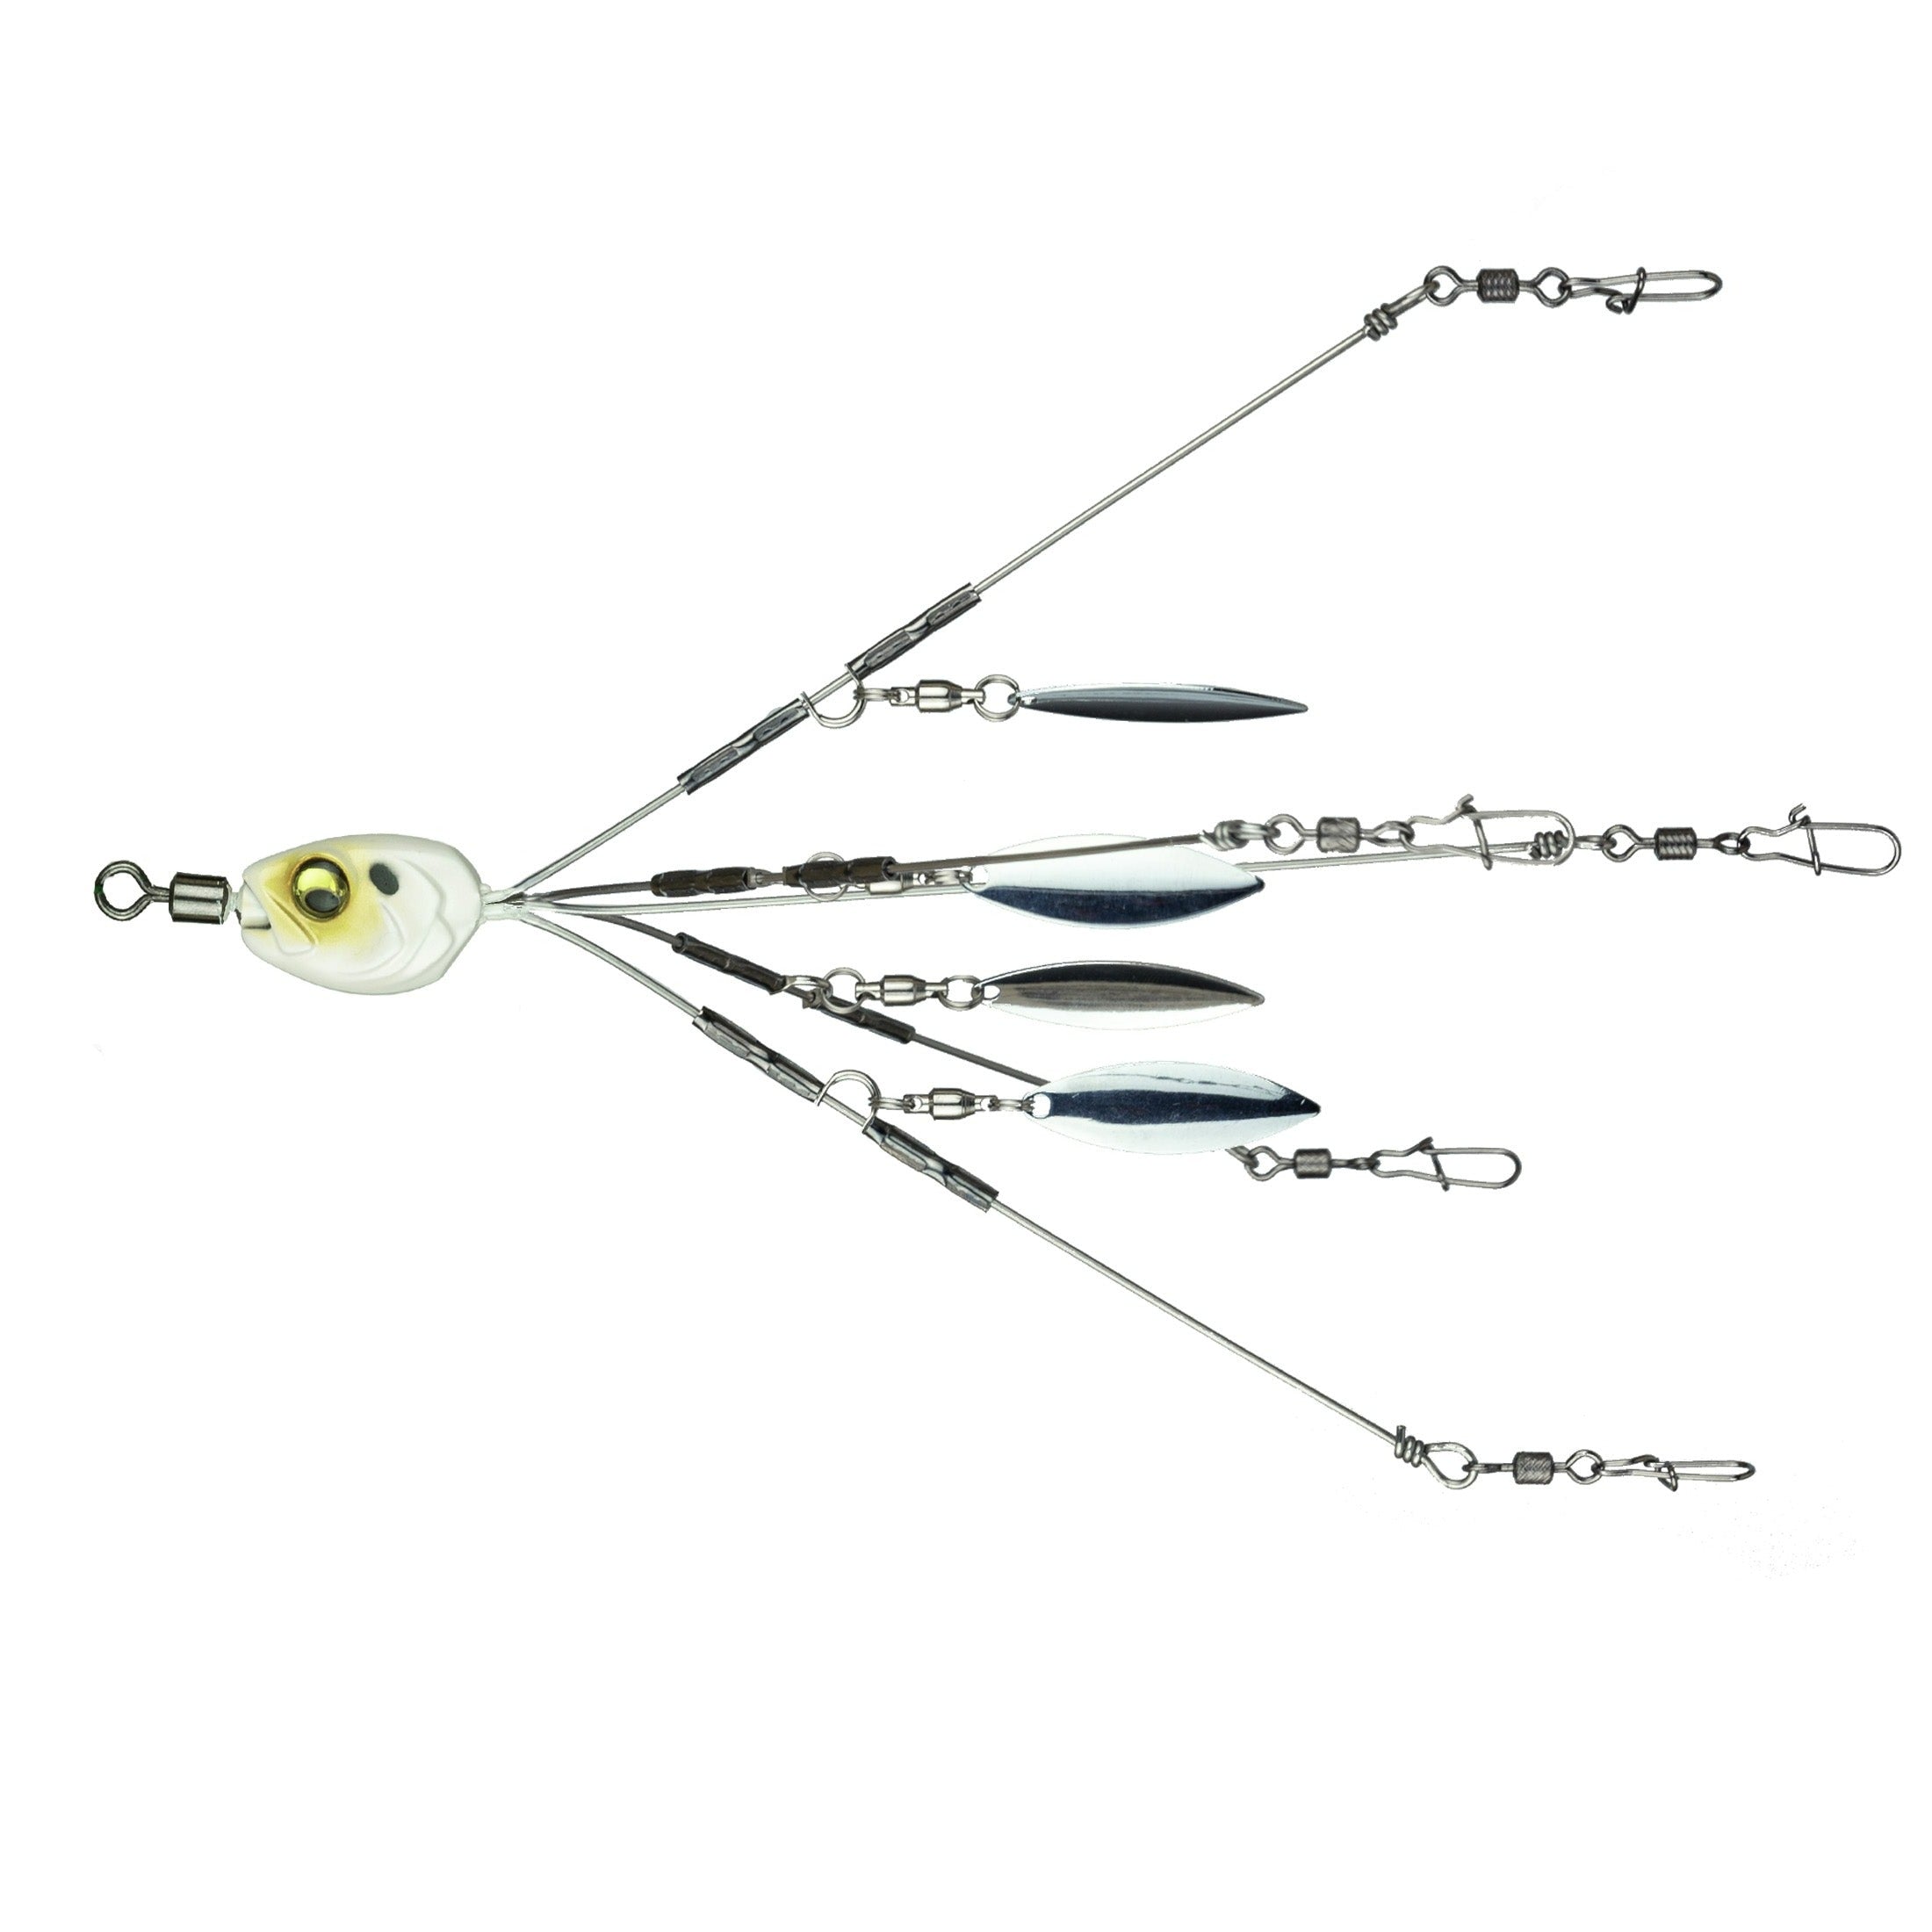 Ghanneey 5Pcs Alabama Rig Umbrella for Bass Fishing 3 Arms Fishing Lure Kit  for Trout Salmon Walleye Perch Freshwater and Saltwater, Bait Rigs -   Canada